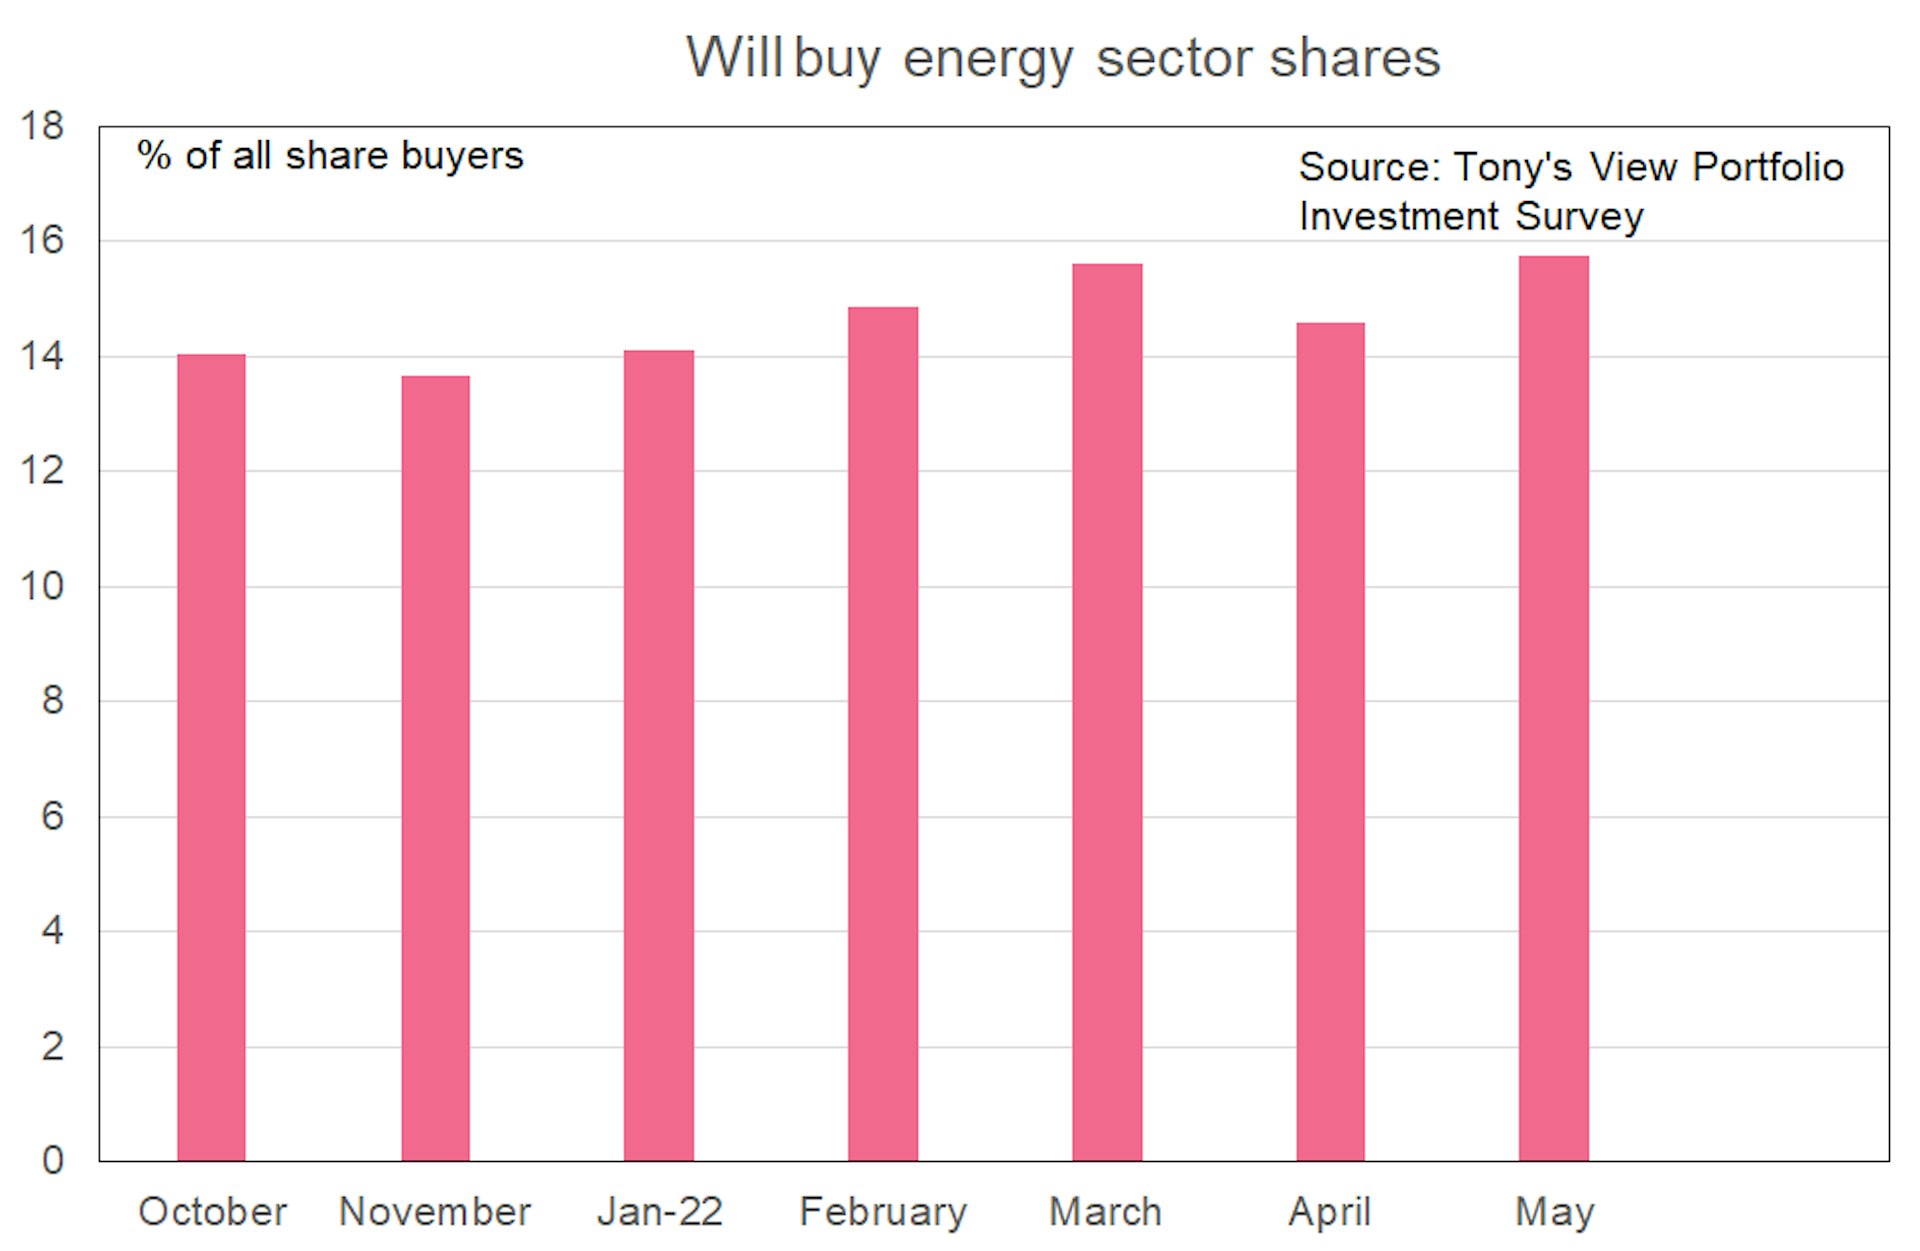 A pink bar graph showing the percentage of all share buyers that will buy energy sector shares. The percentage has risen steadily, from 14% in October 2021 to just under 16% in May 2022. 